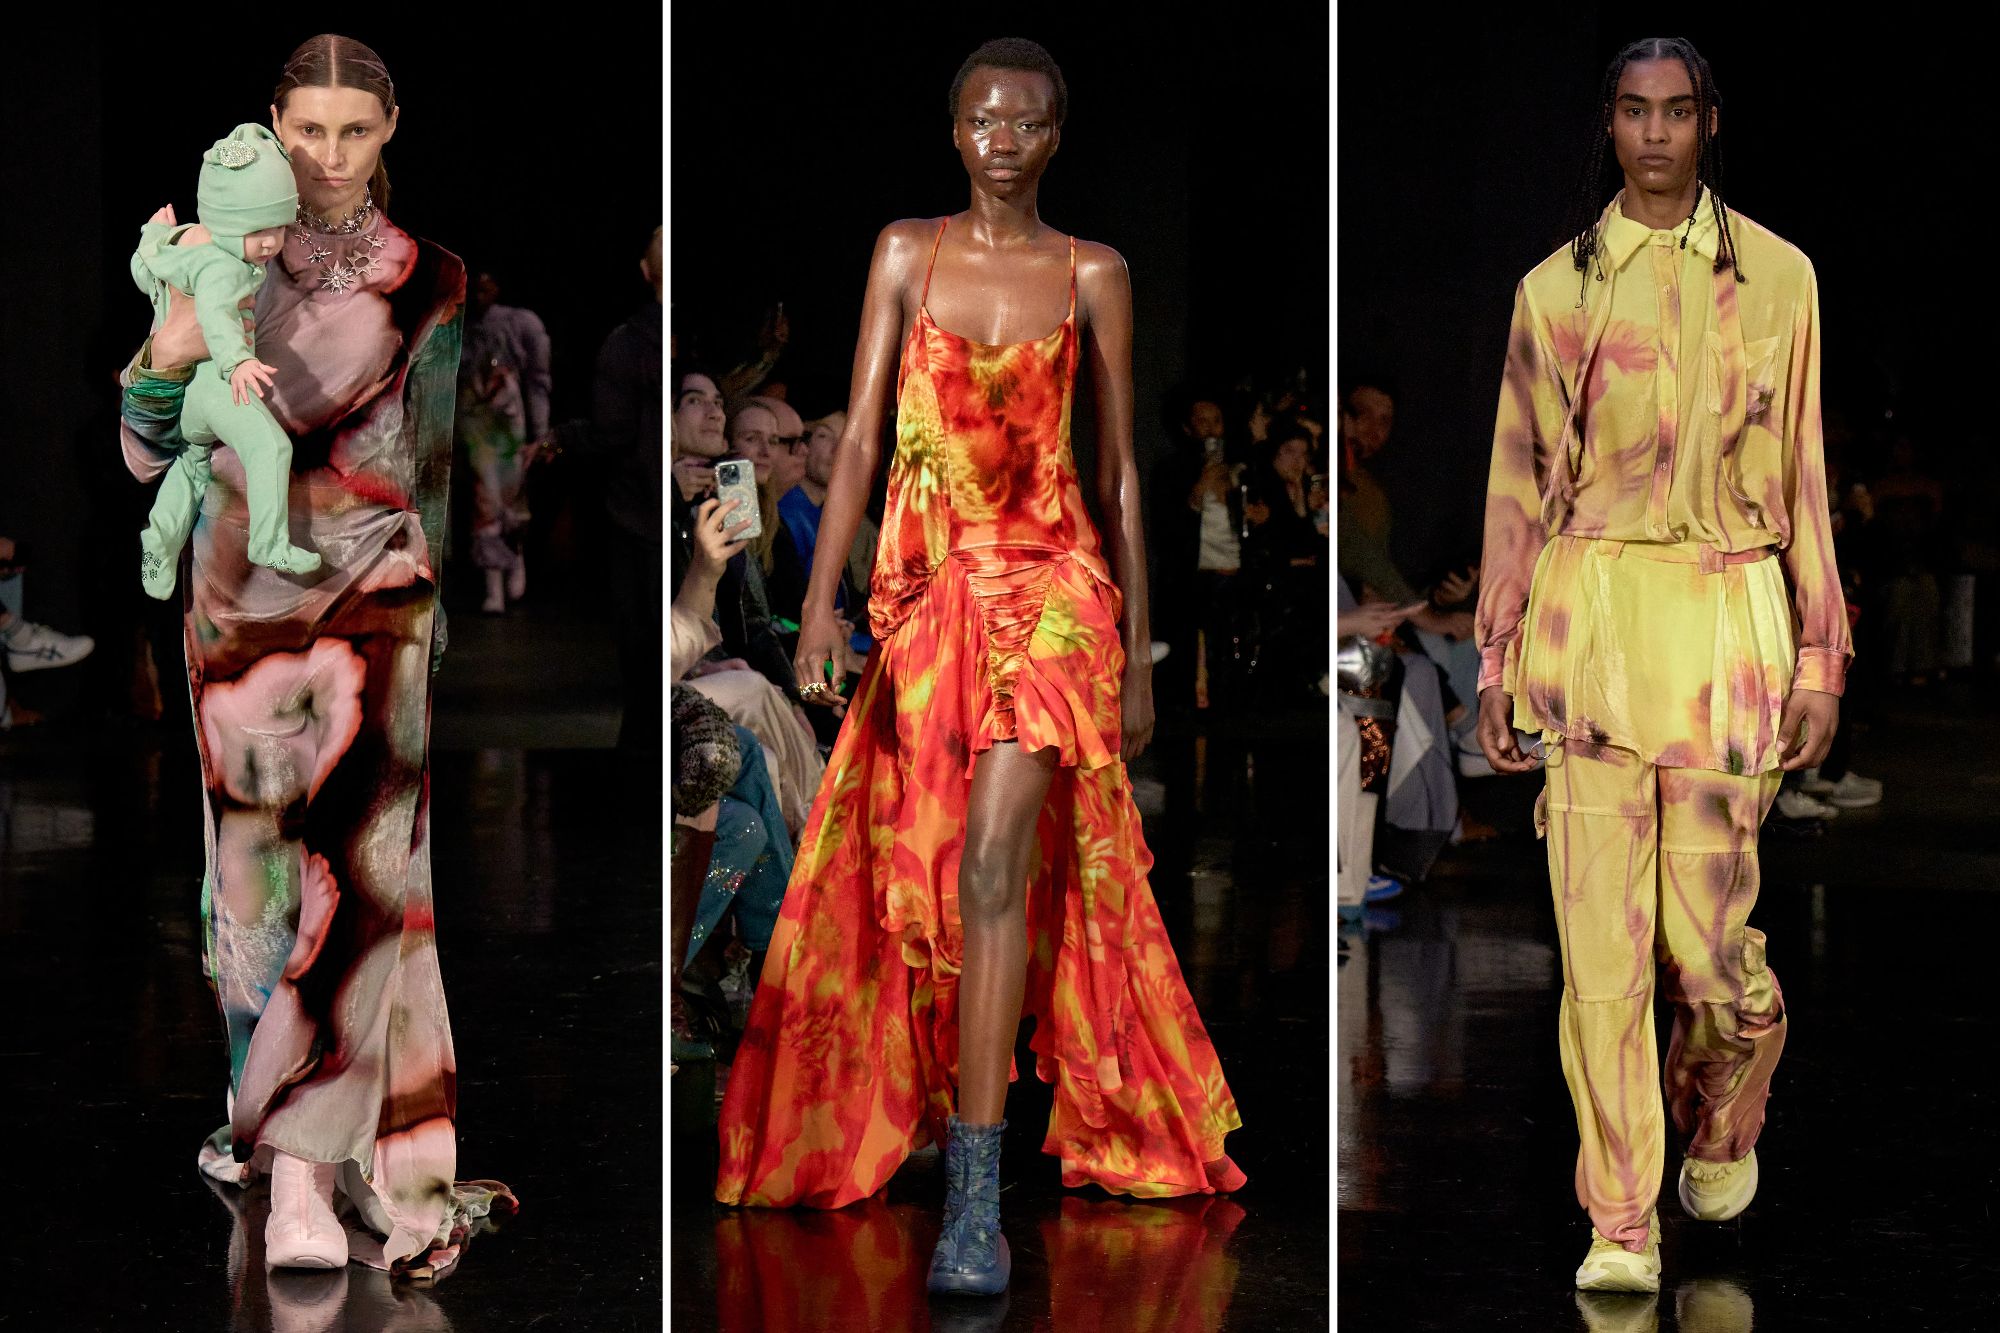 Three looks from Collina Strada's NYFW feature a model holding a baby, a flowing orange dress, and a yellow draped dress shirt and pants.